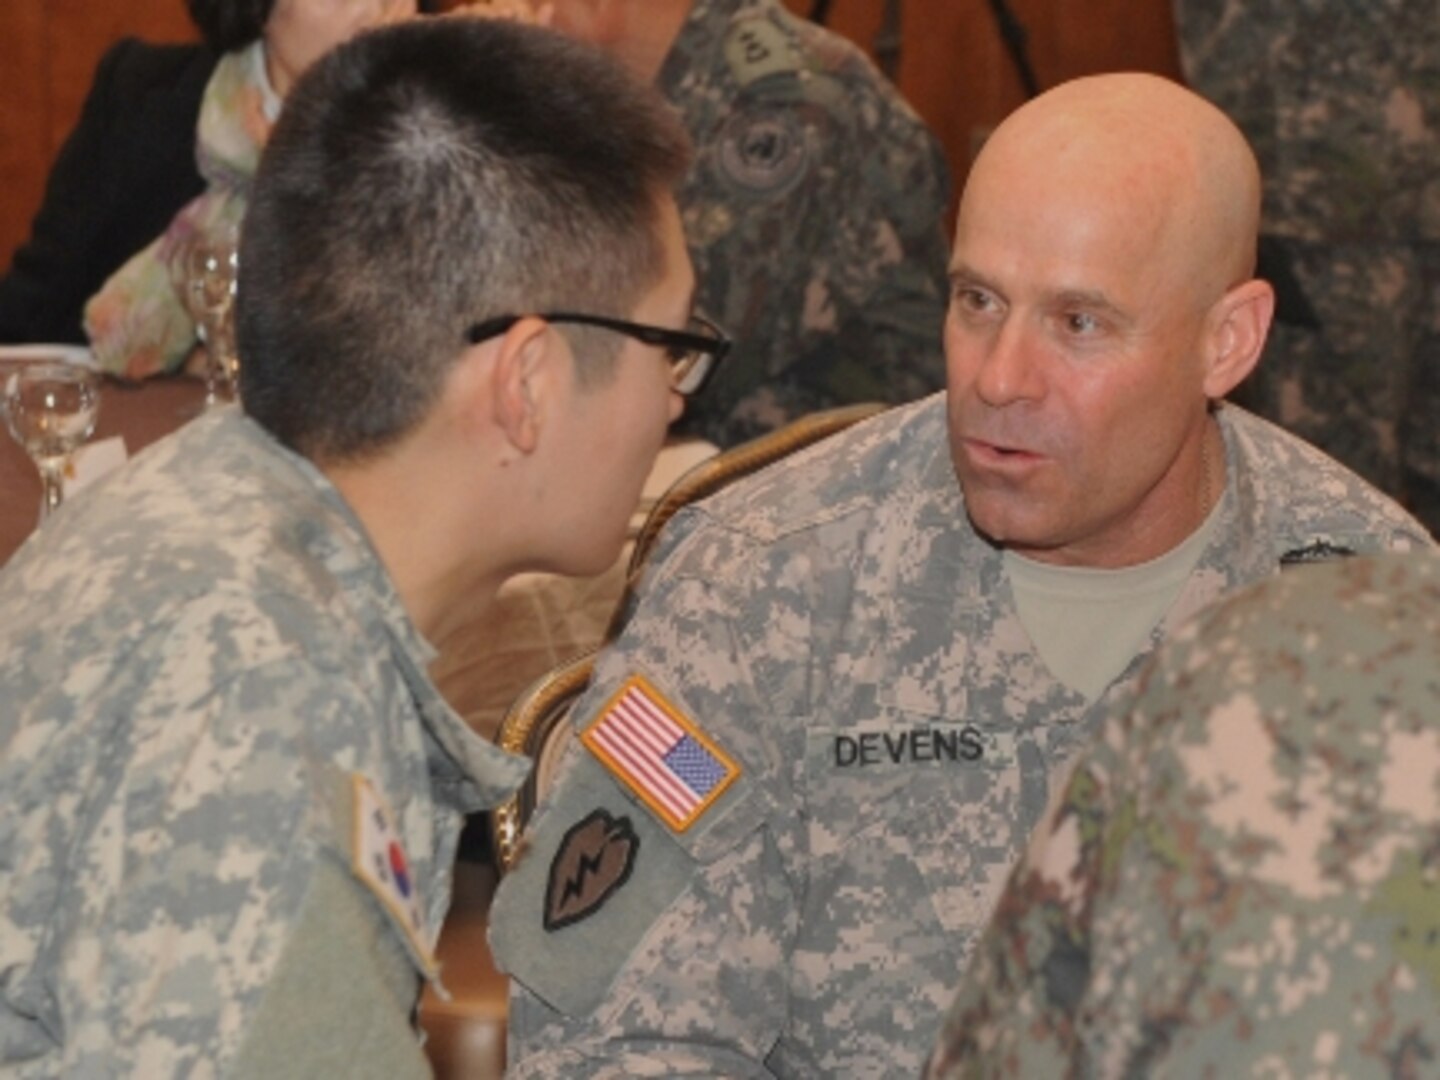 Eighth Army Command Sgt. Maj. Ray A. Devens (right) spoke to senior enlisted leaders at the the ROK NCO Policy Development Seminar Nov. 21. (Photo by Pfc. Jang, Won Suk 8th Army PAO)